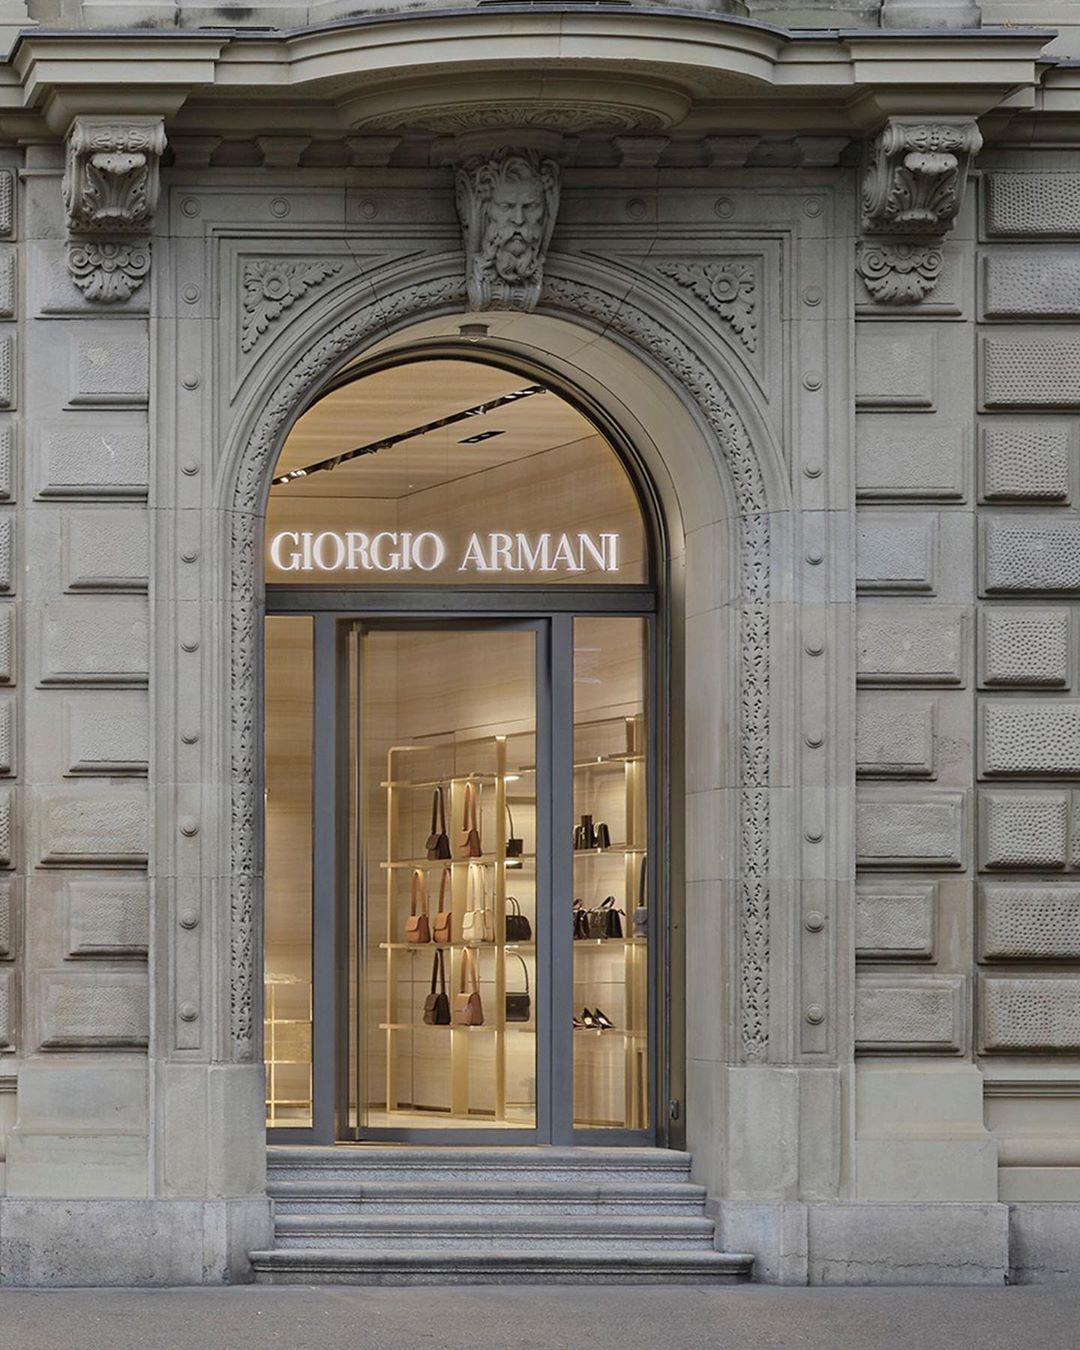 Giorgio Armani - Announcing the re-opening of the Giorgio Armani boutique in Zürich, at n.25 of Bahnhofstrasse.
Situated in the historic heart of the city, the completely renovated store houses the me...